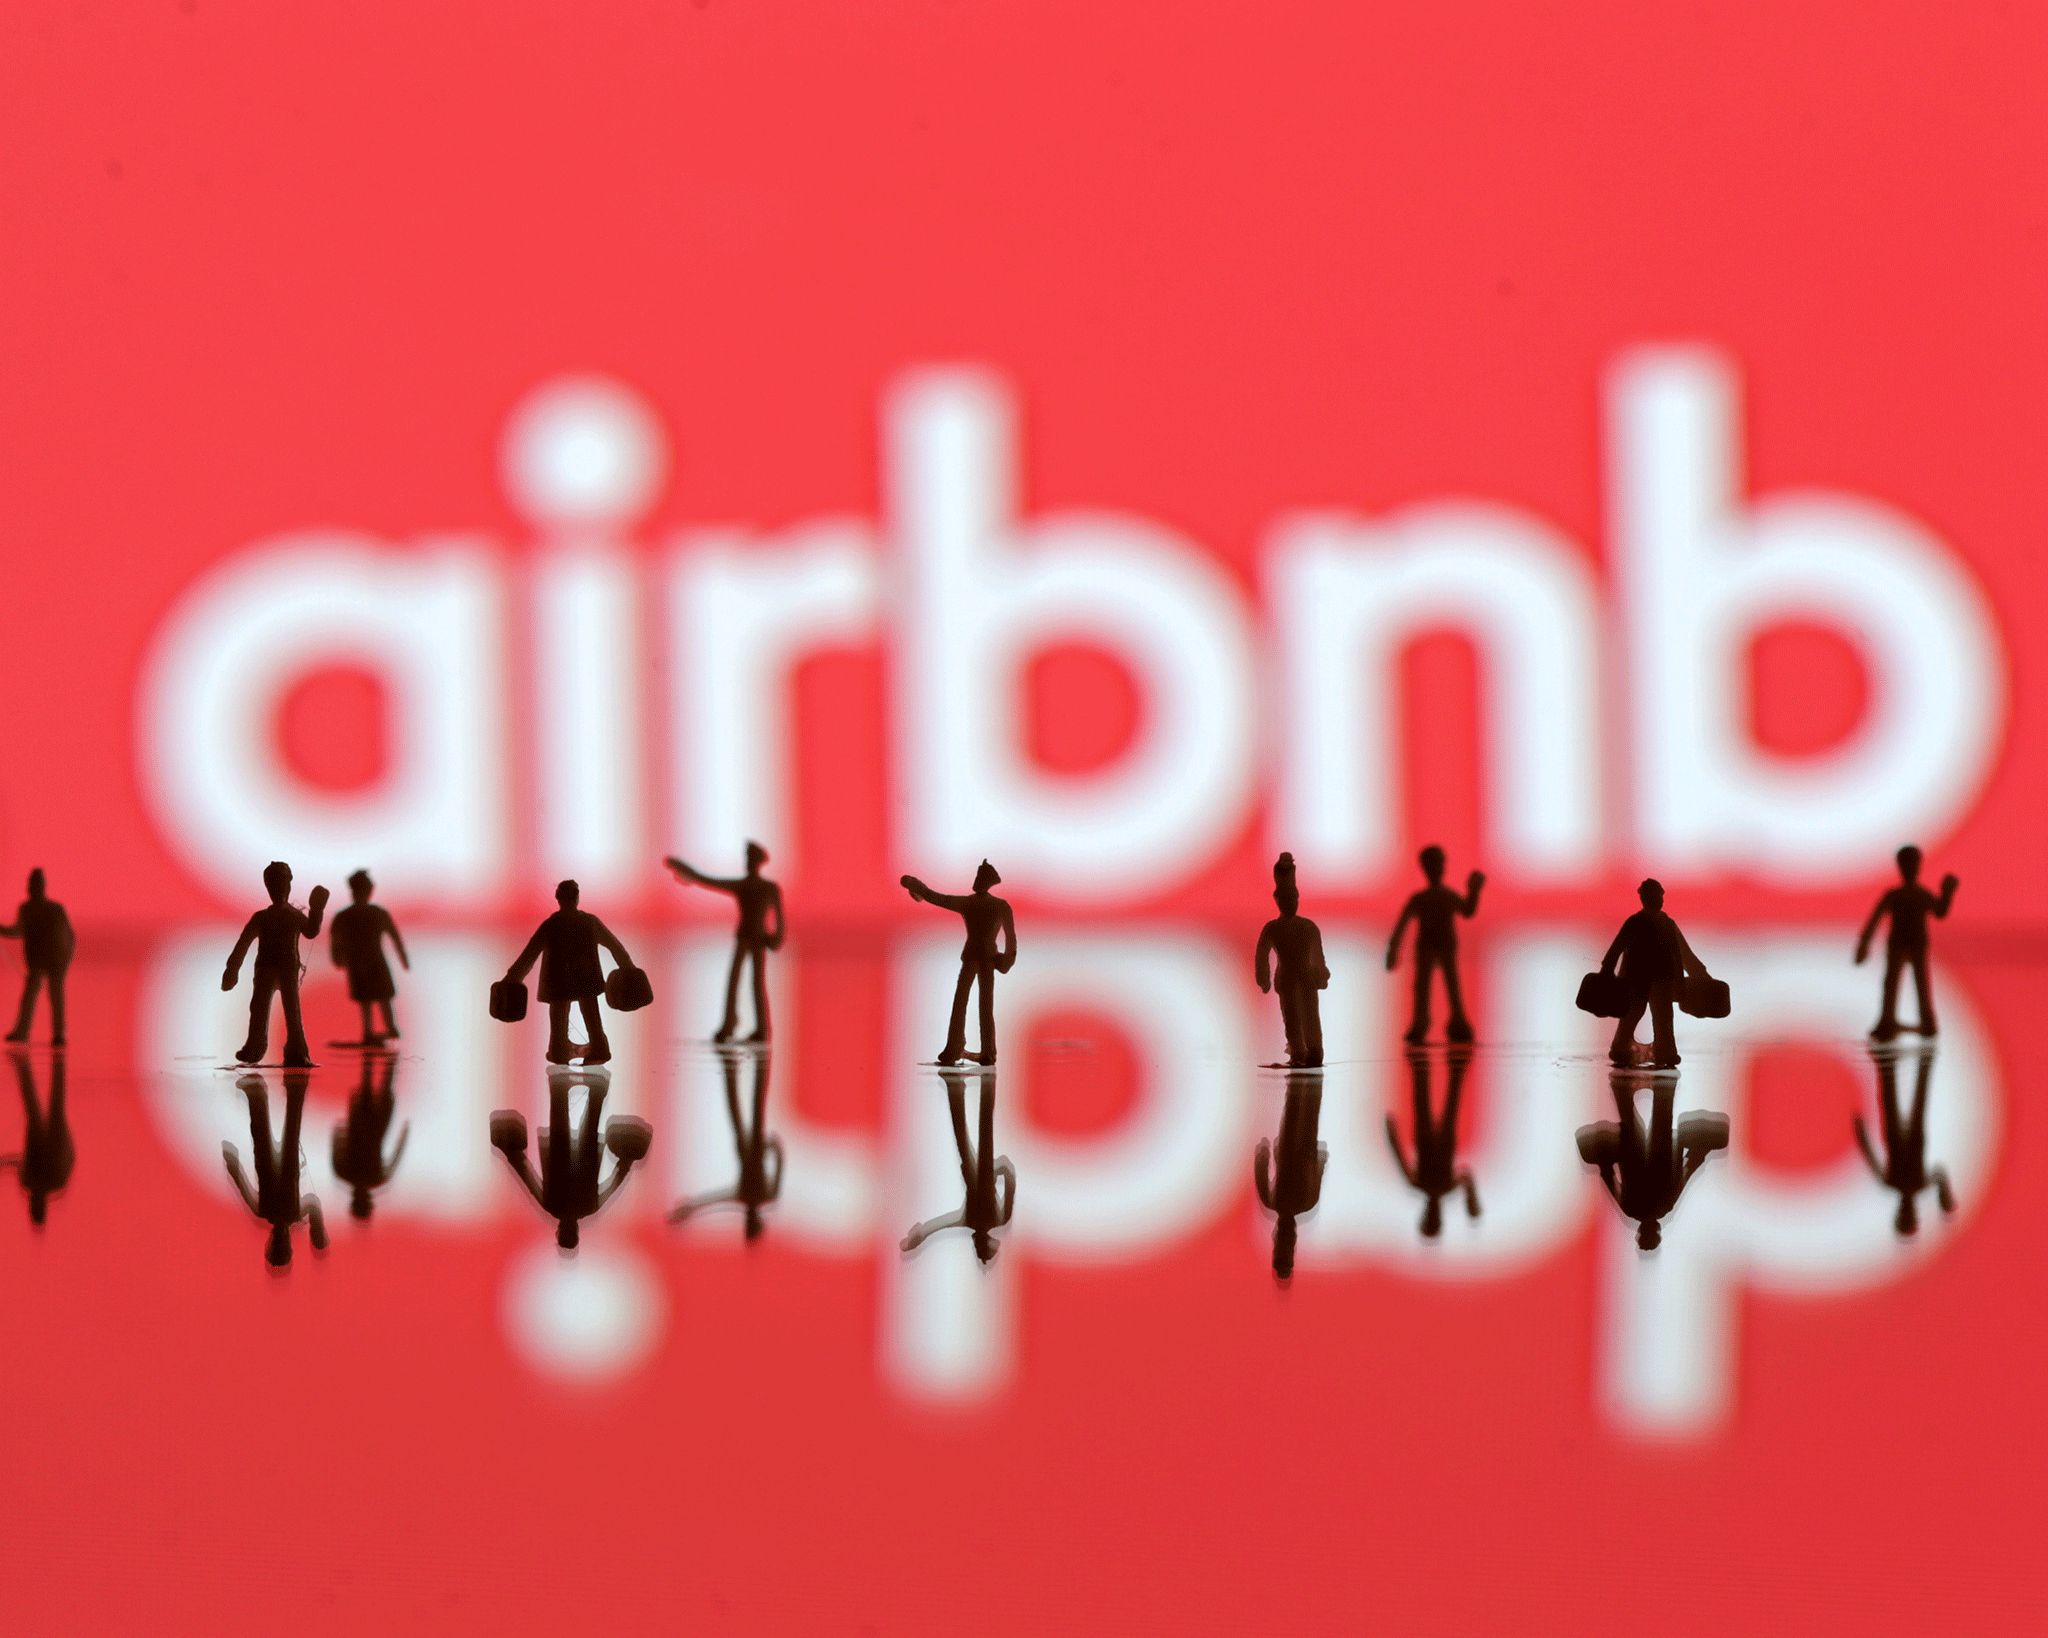 Airbnb has come under increasing scrutiny in several cities over the past year